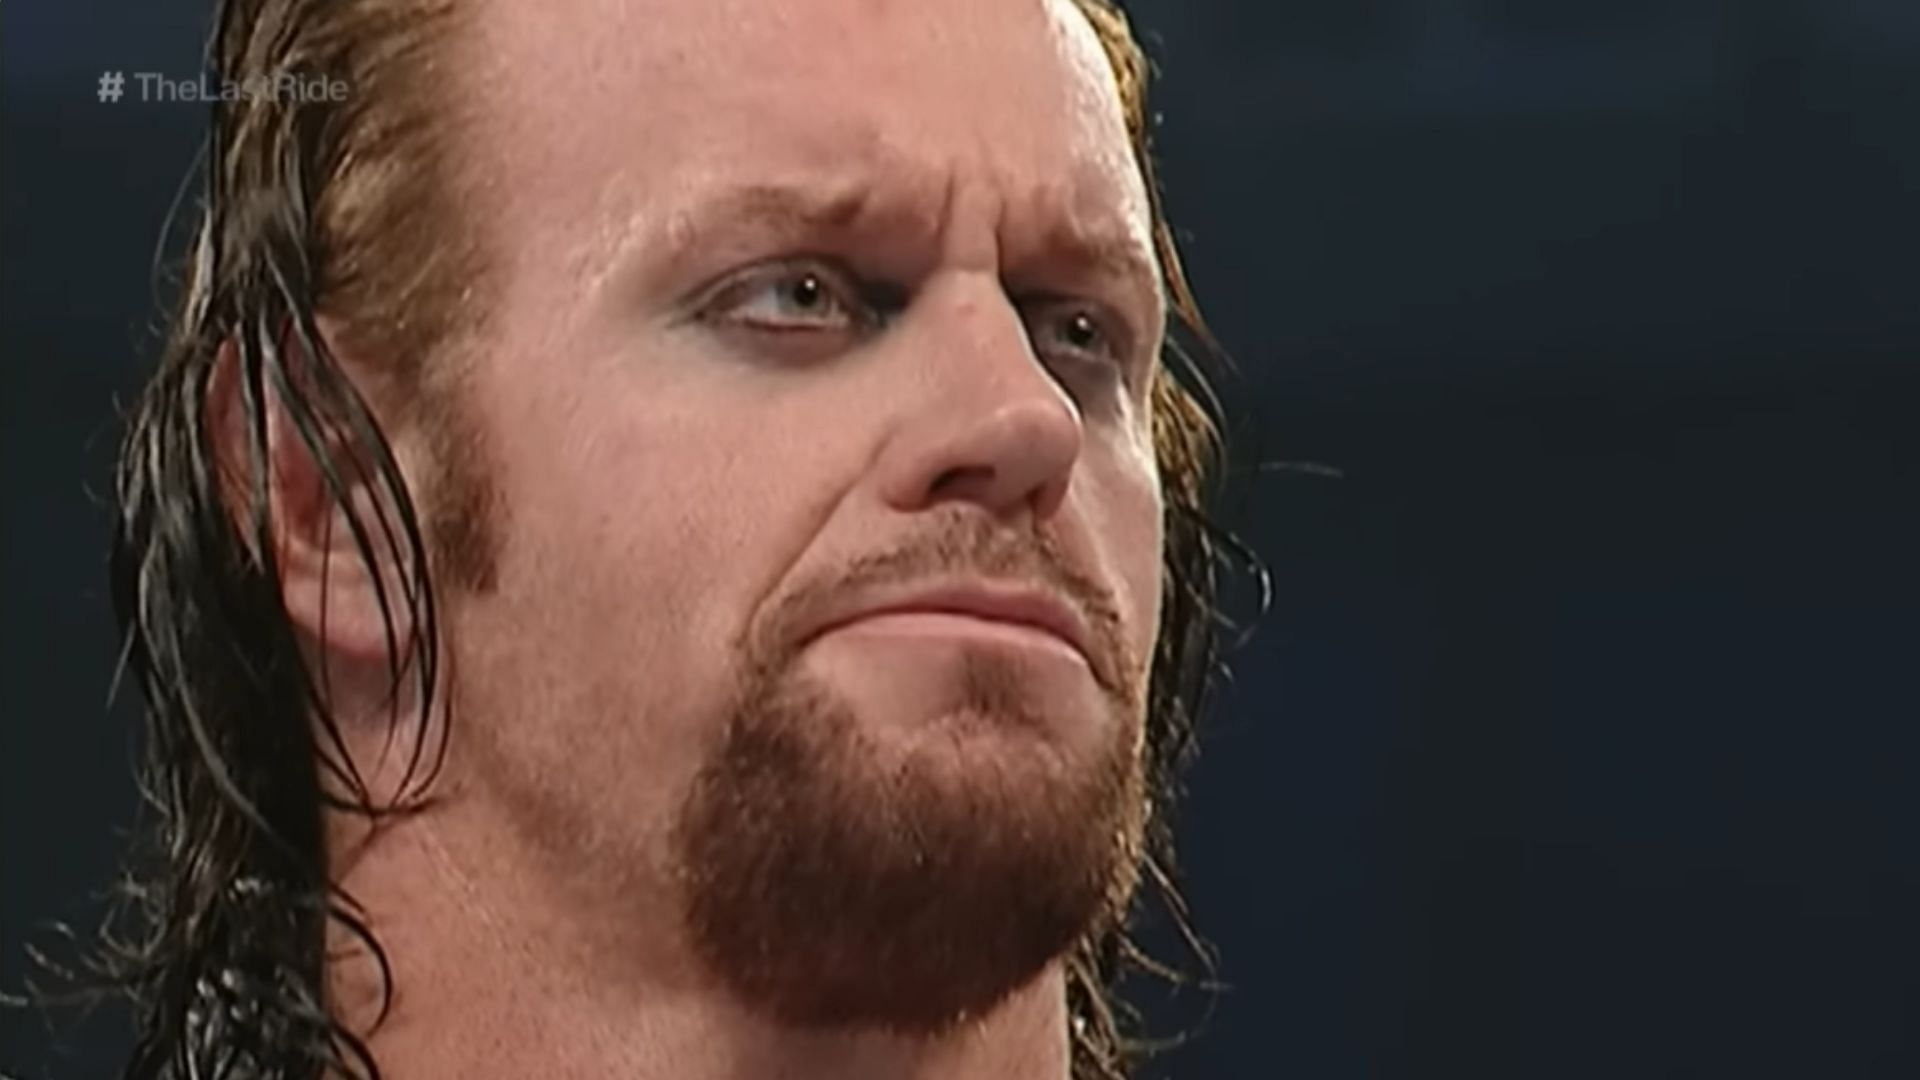 The Undertaker wrestled for WWE between 1990 and 2020